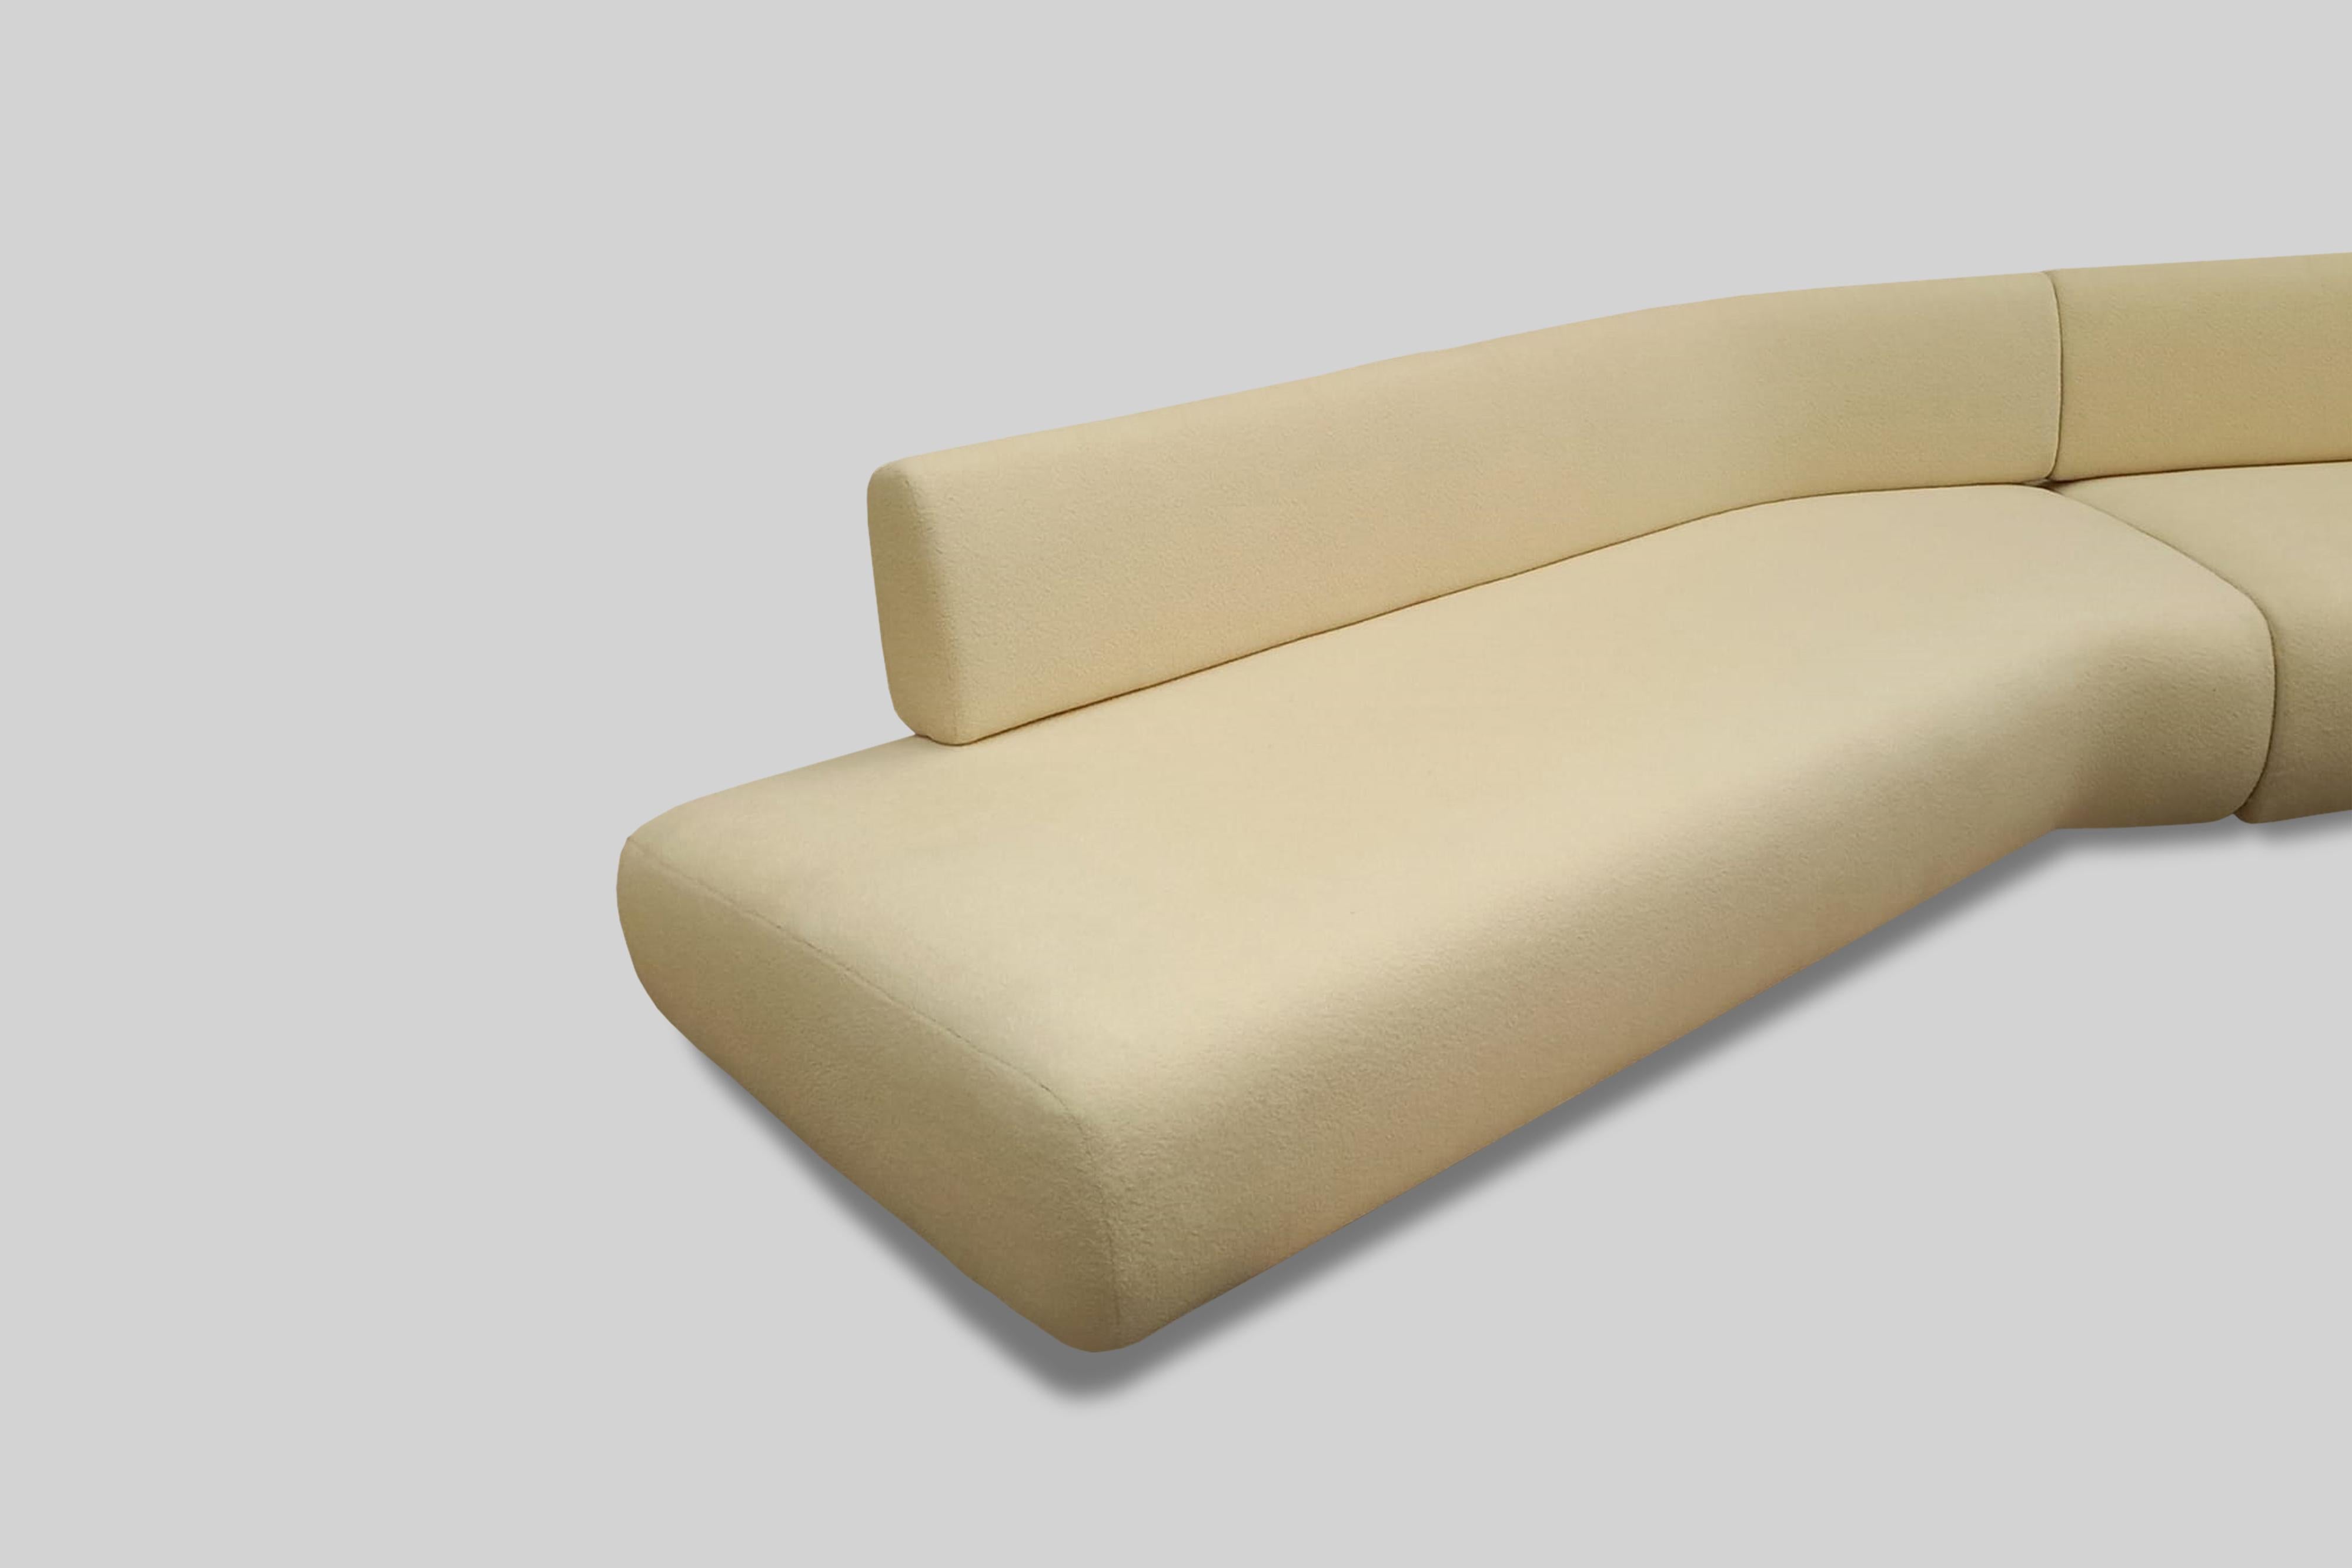 Margot V Sectional sofa in fabric and Brass Base by Alexander Diaz Anderson

Module 1:
L 229.1cm/90.1”
W 101.2cm/39.8”

Module 2:
L 266.3cm/104.8”
W 101.2cm/39.8”

Priced for Grade A Fabric.